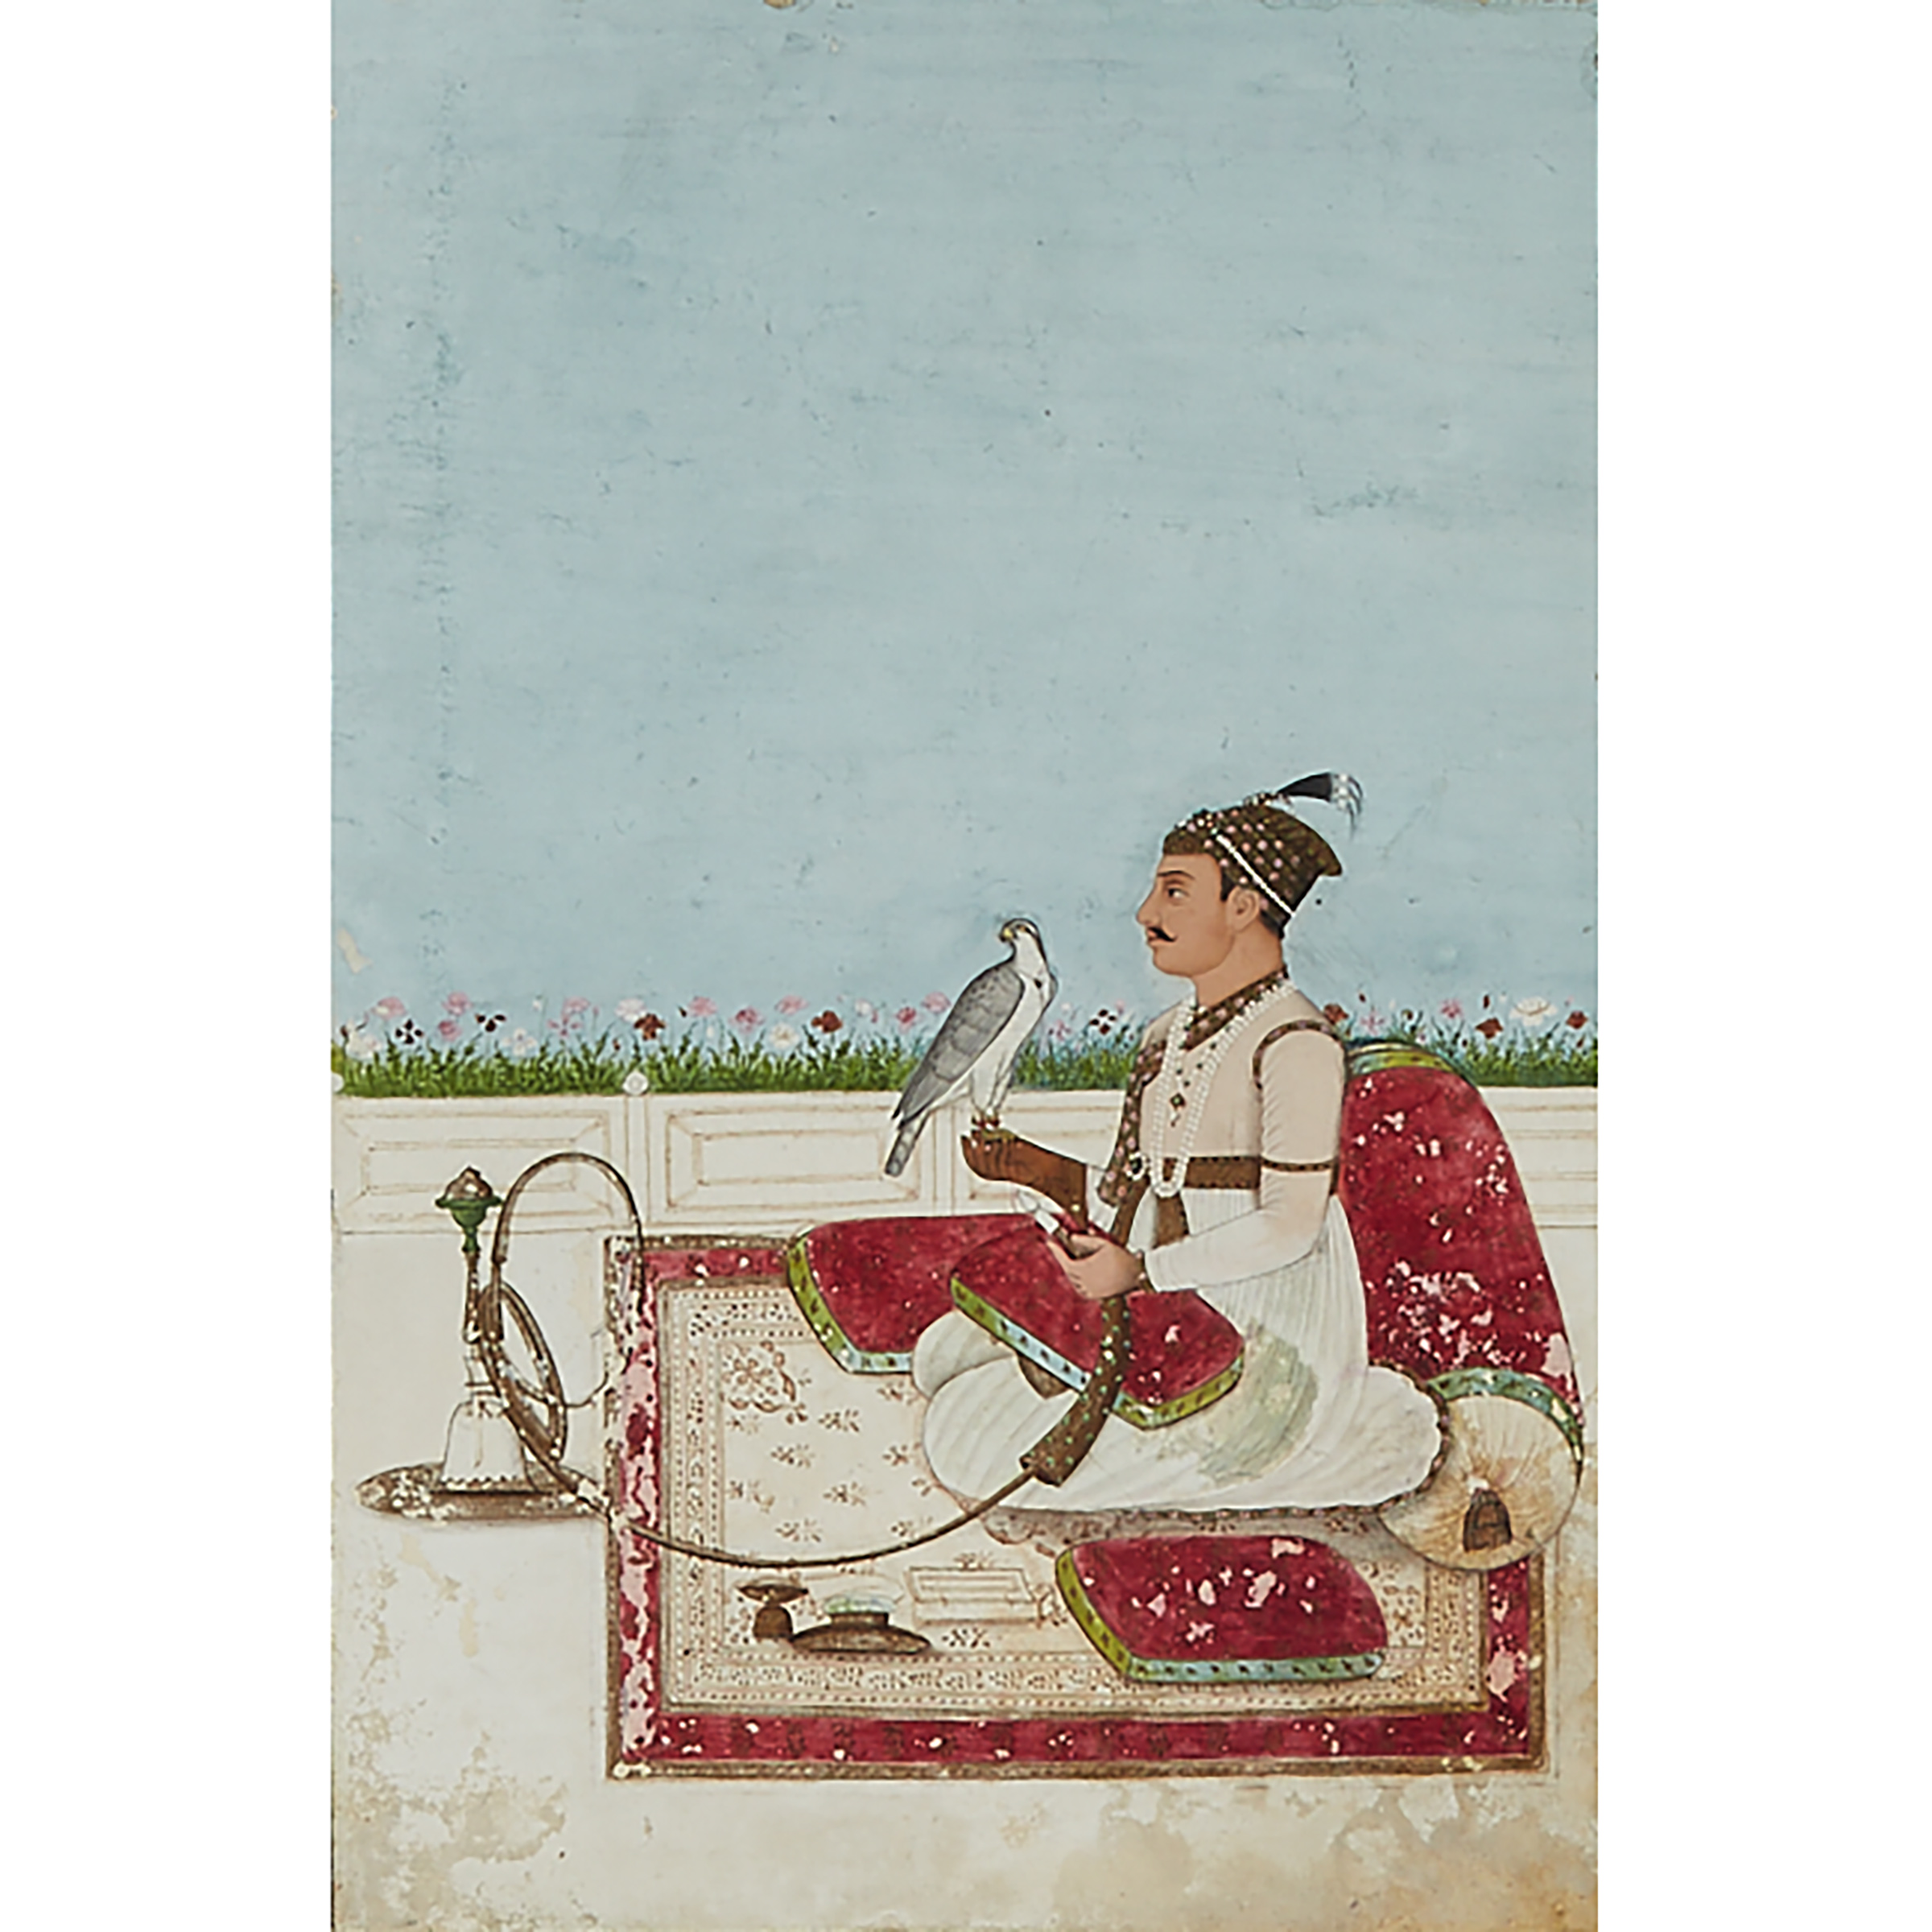 Bikaner School, Portrait of a Seated Prince, Early 19th Century